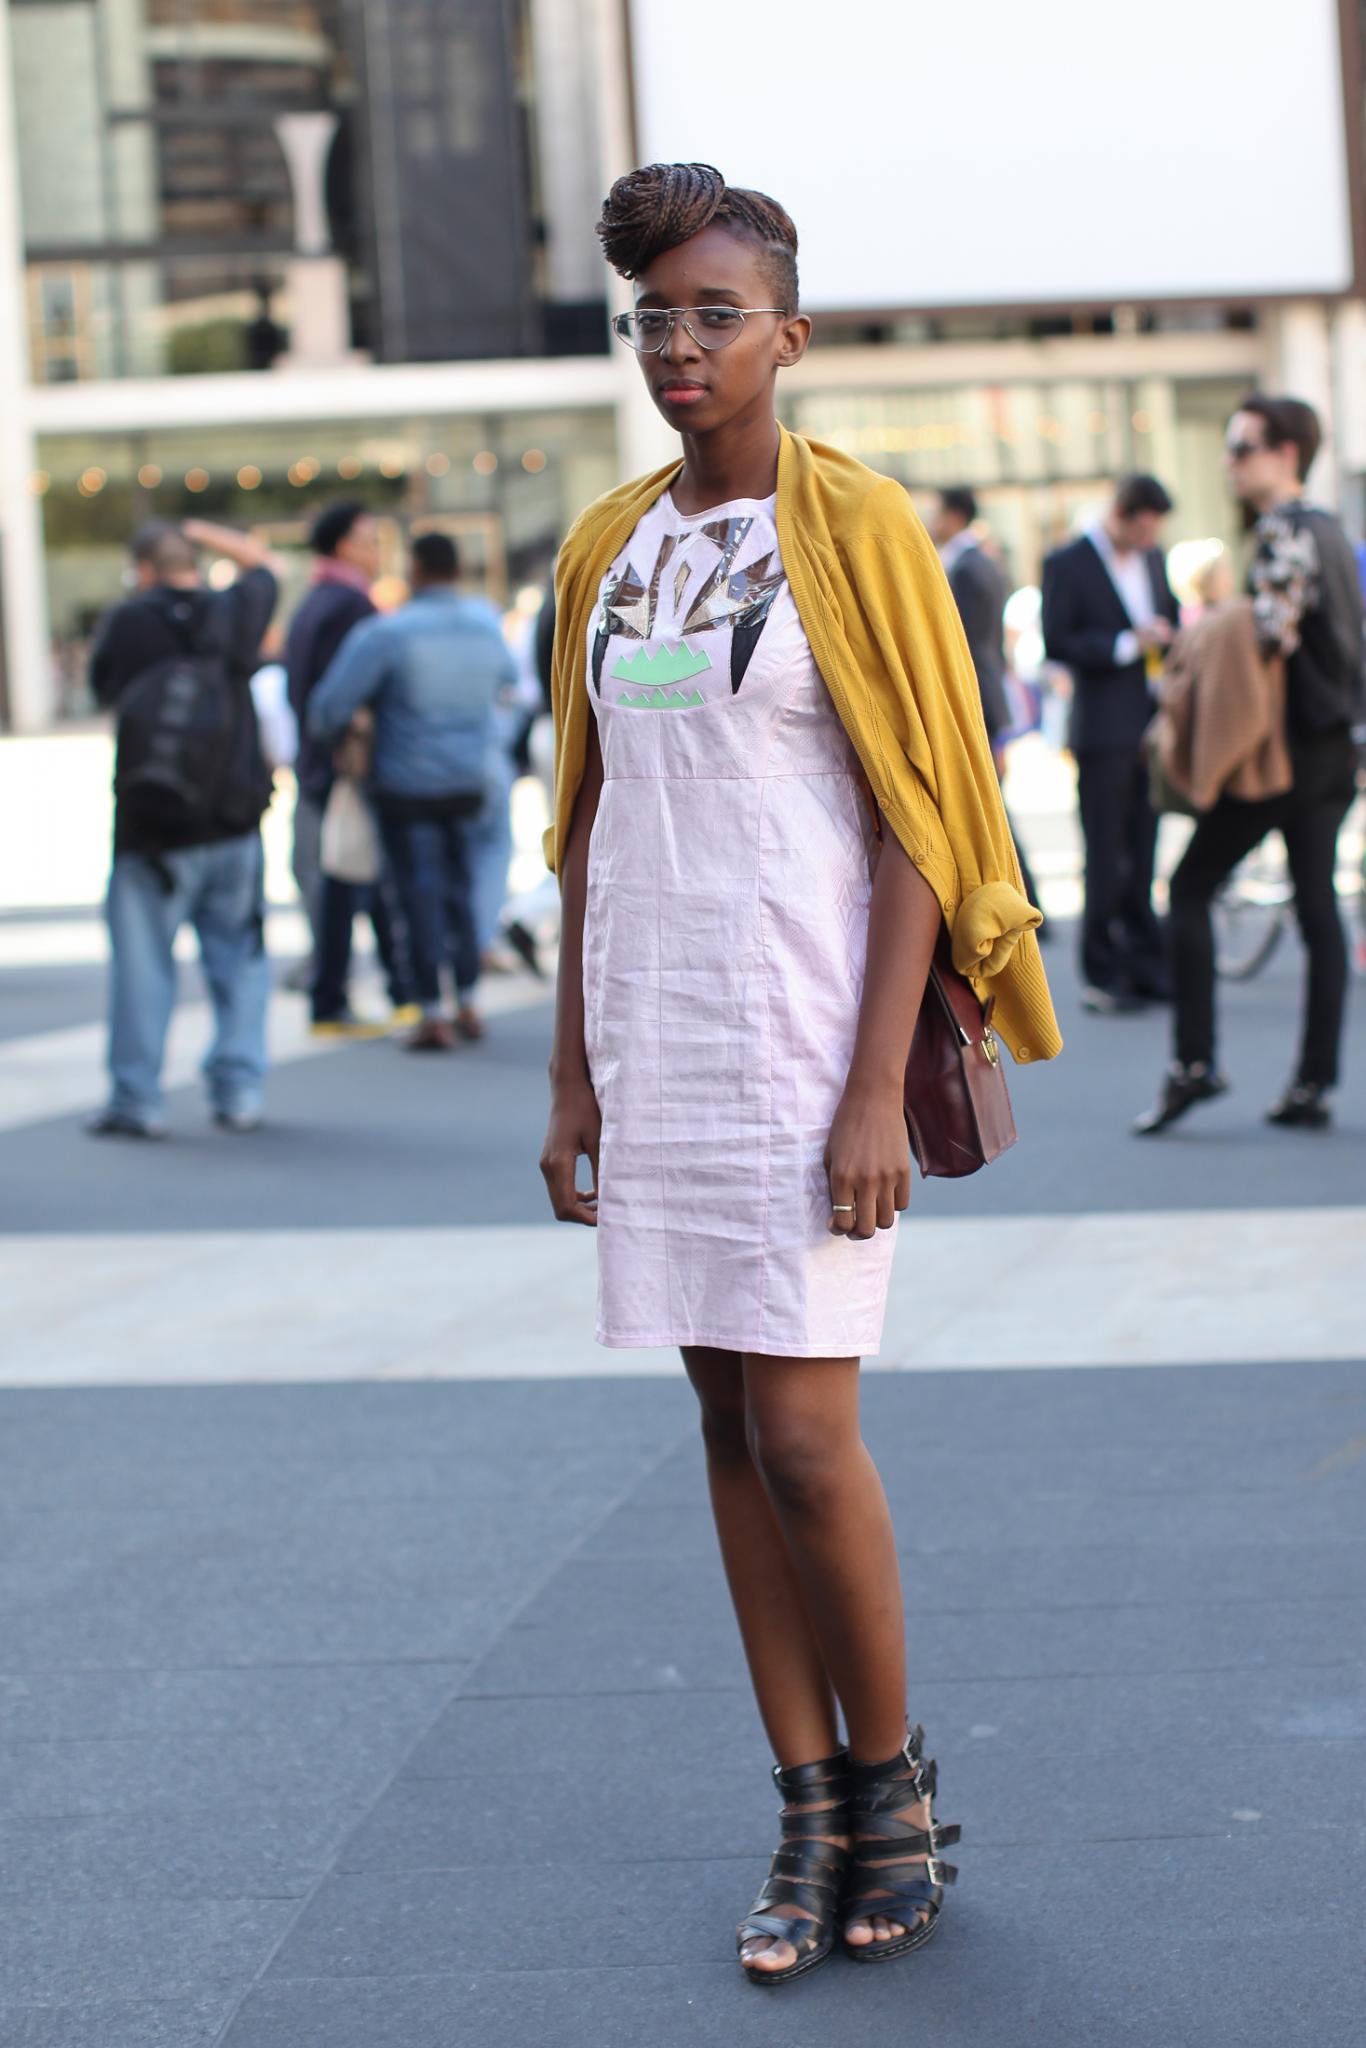 Street Style: Our Favorite Fashion Week Trends